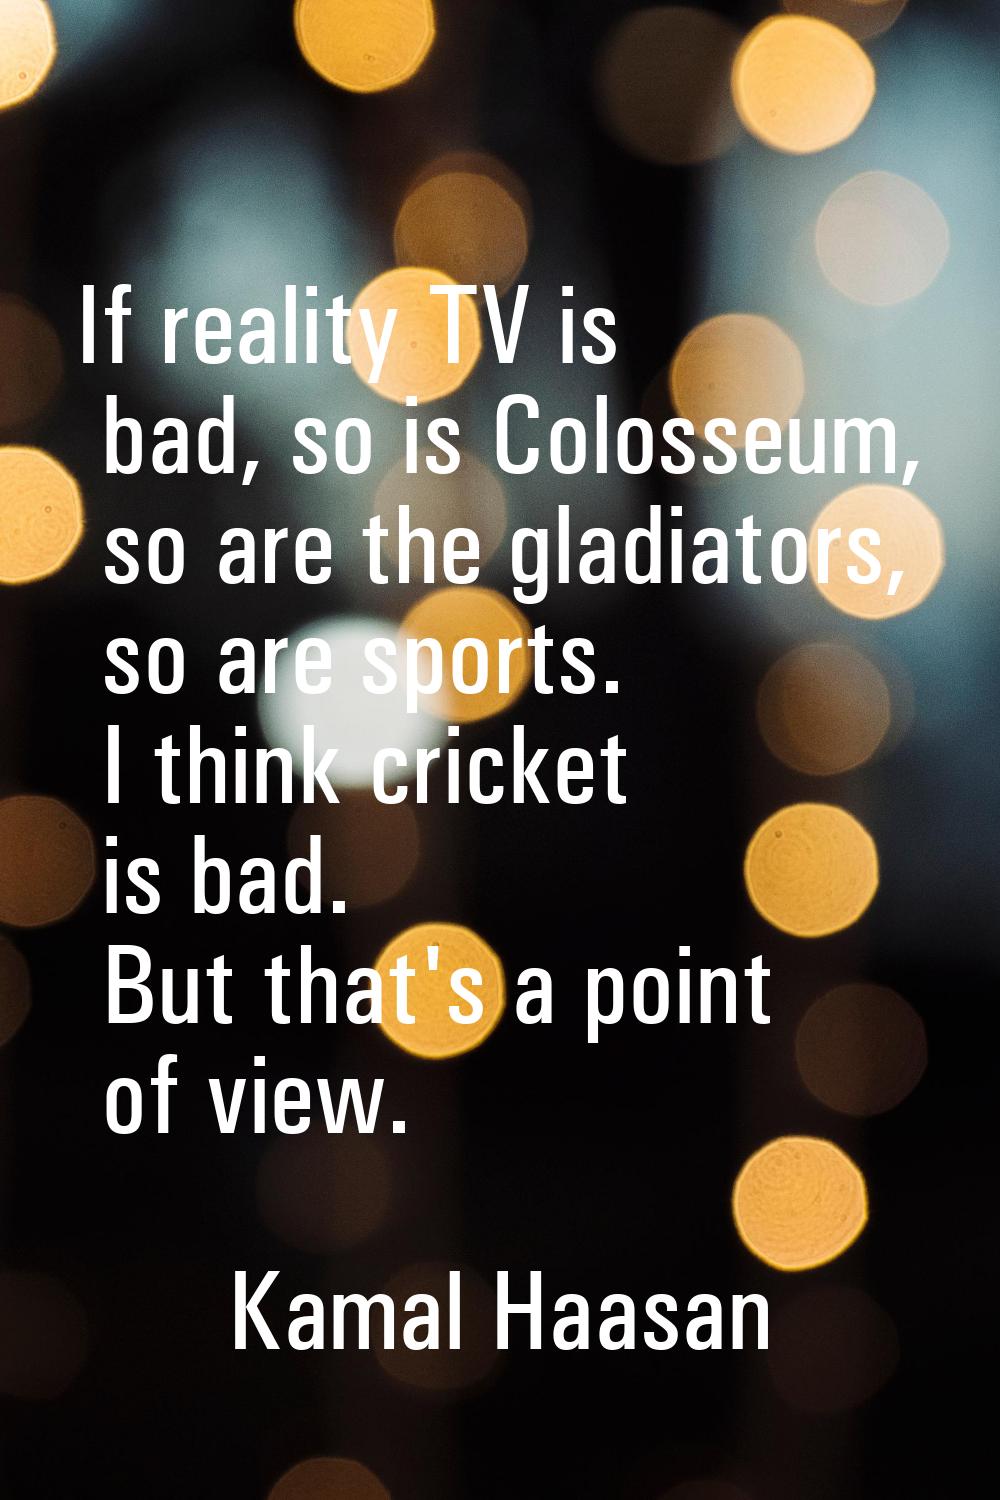 If reality TV is bad, so is Colosseum, so are the gladiators, so are sports. I think cricket is bad